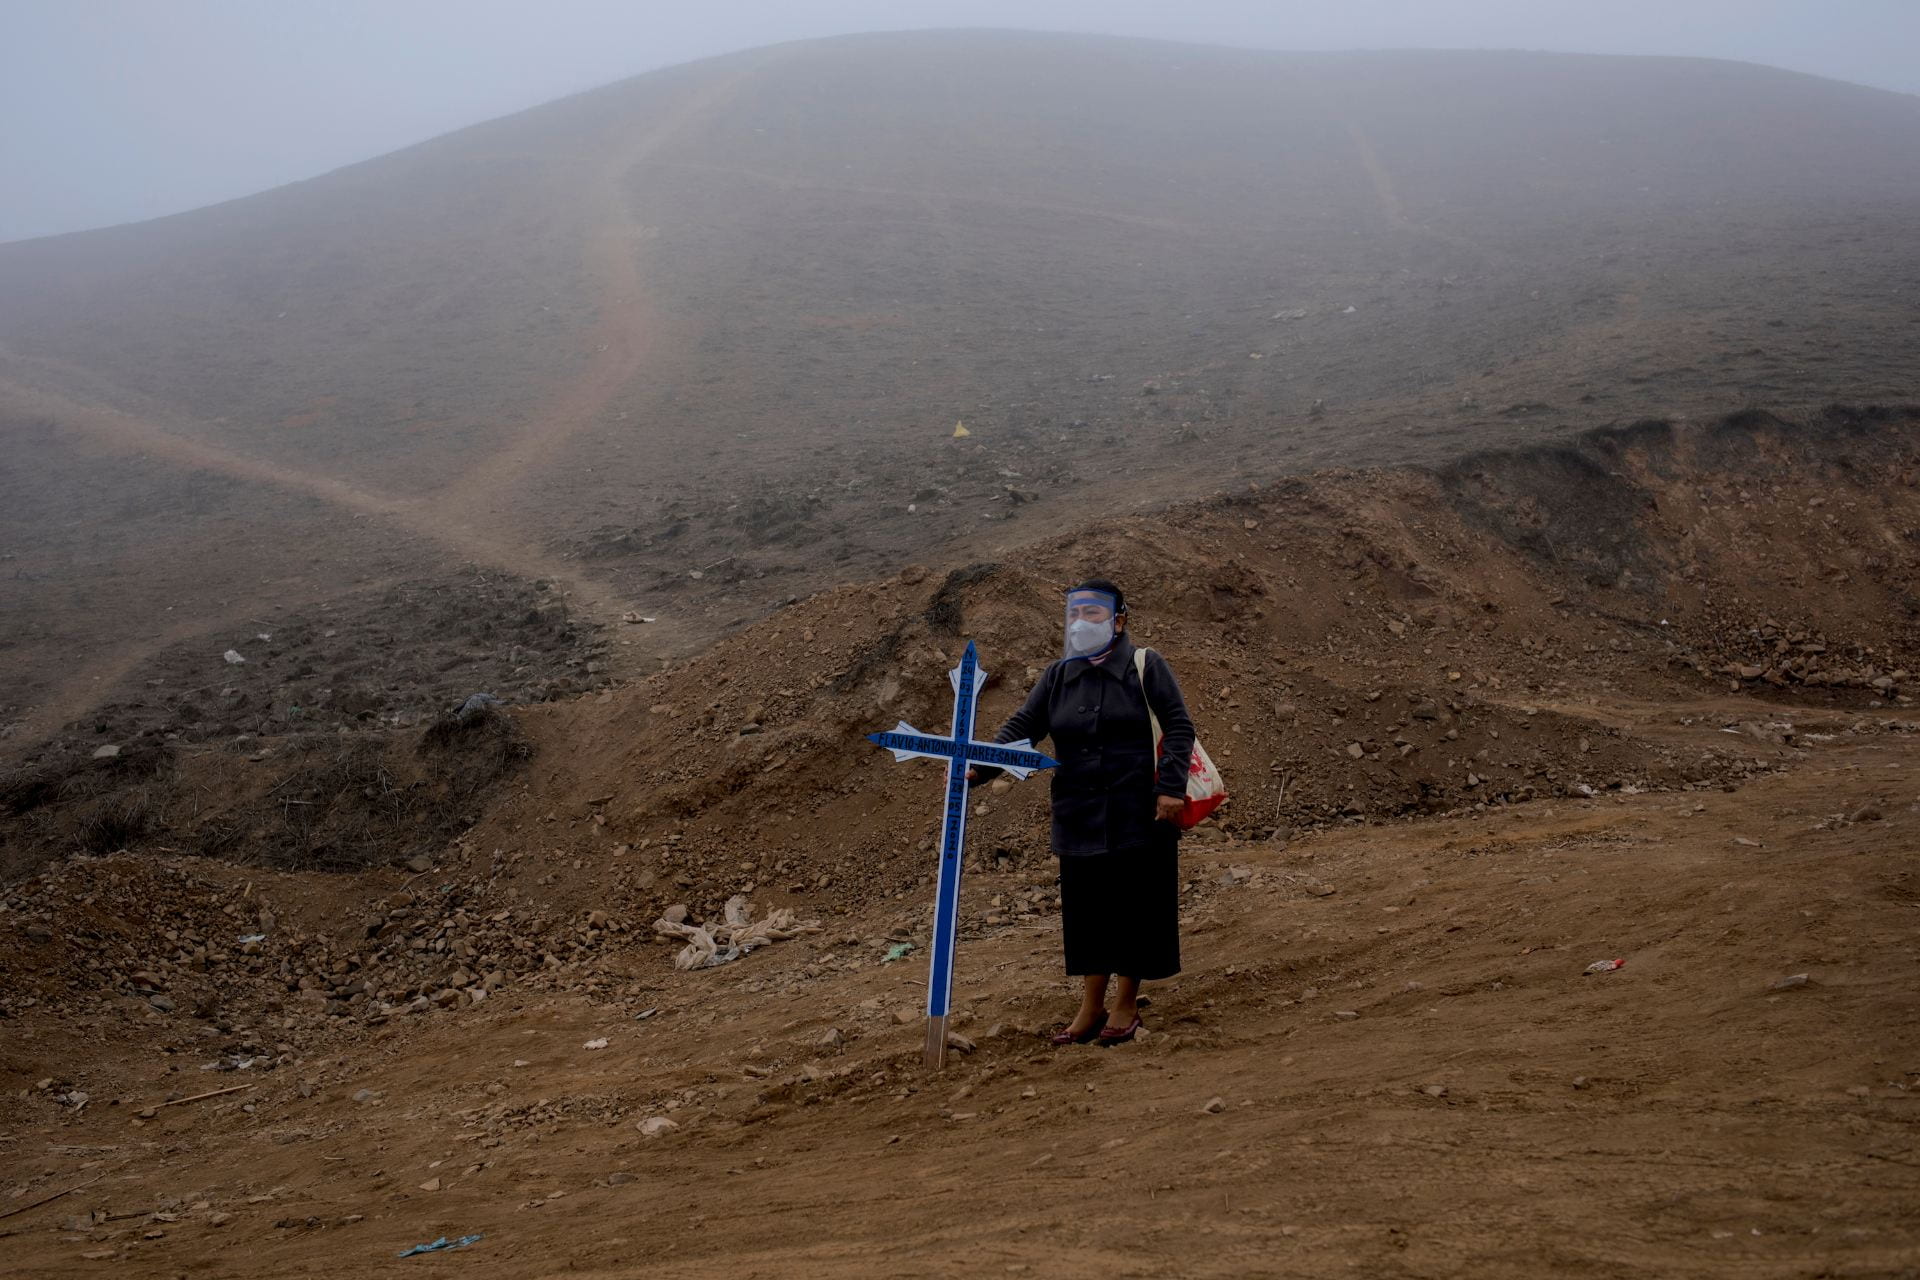 Women standing in the desert with a blue cross